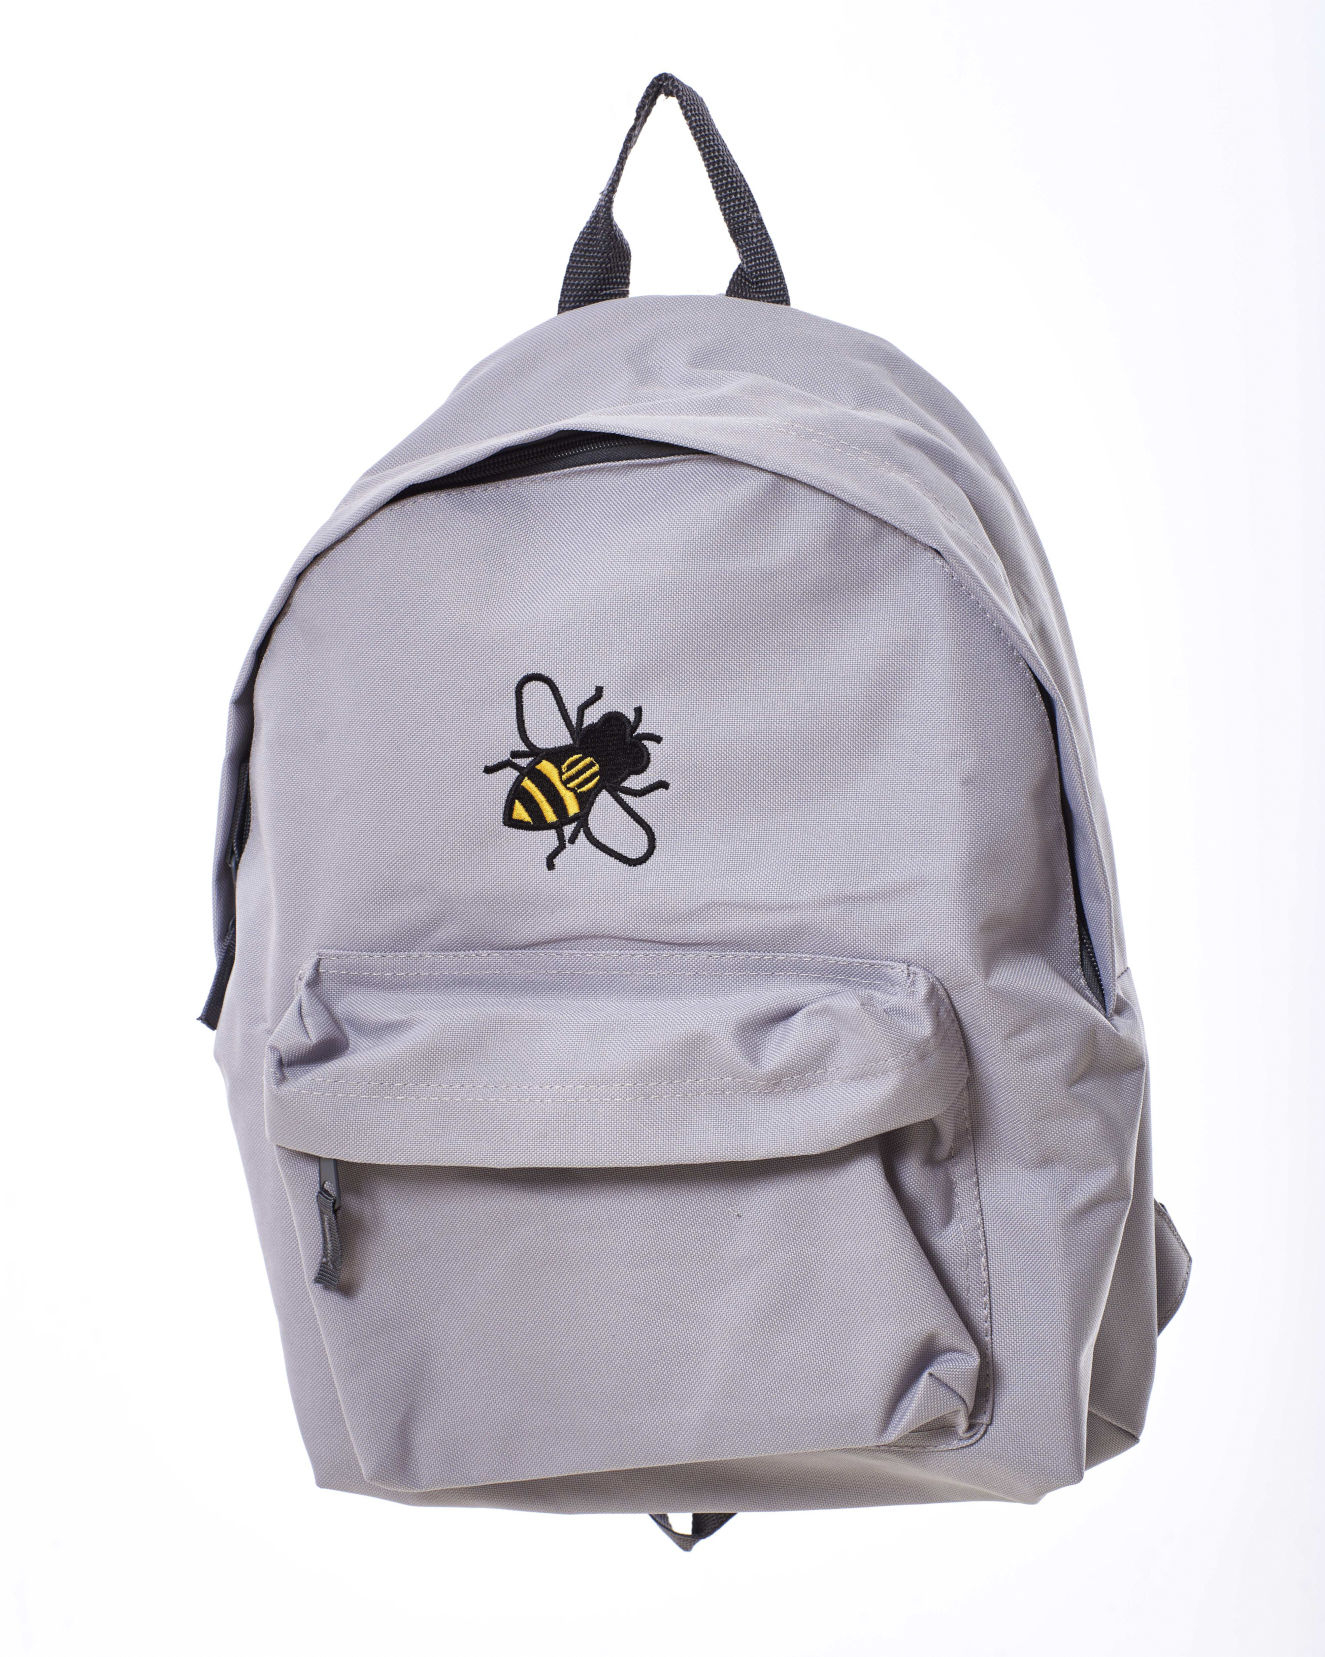 Bee Sunflower Small Backpack for Women Girls, Mini Backpack Travel Casual Backpack  Purse Satchel Daypack : Amazon.ca: Clothing, Shoes & Accessories